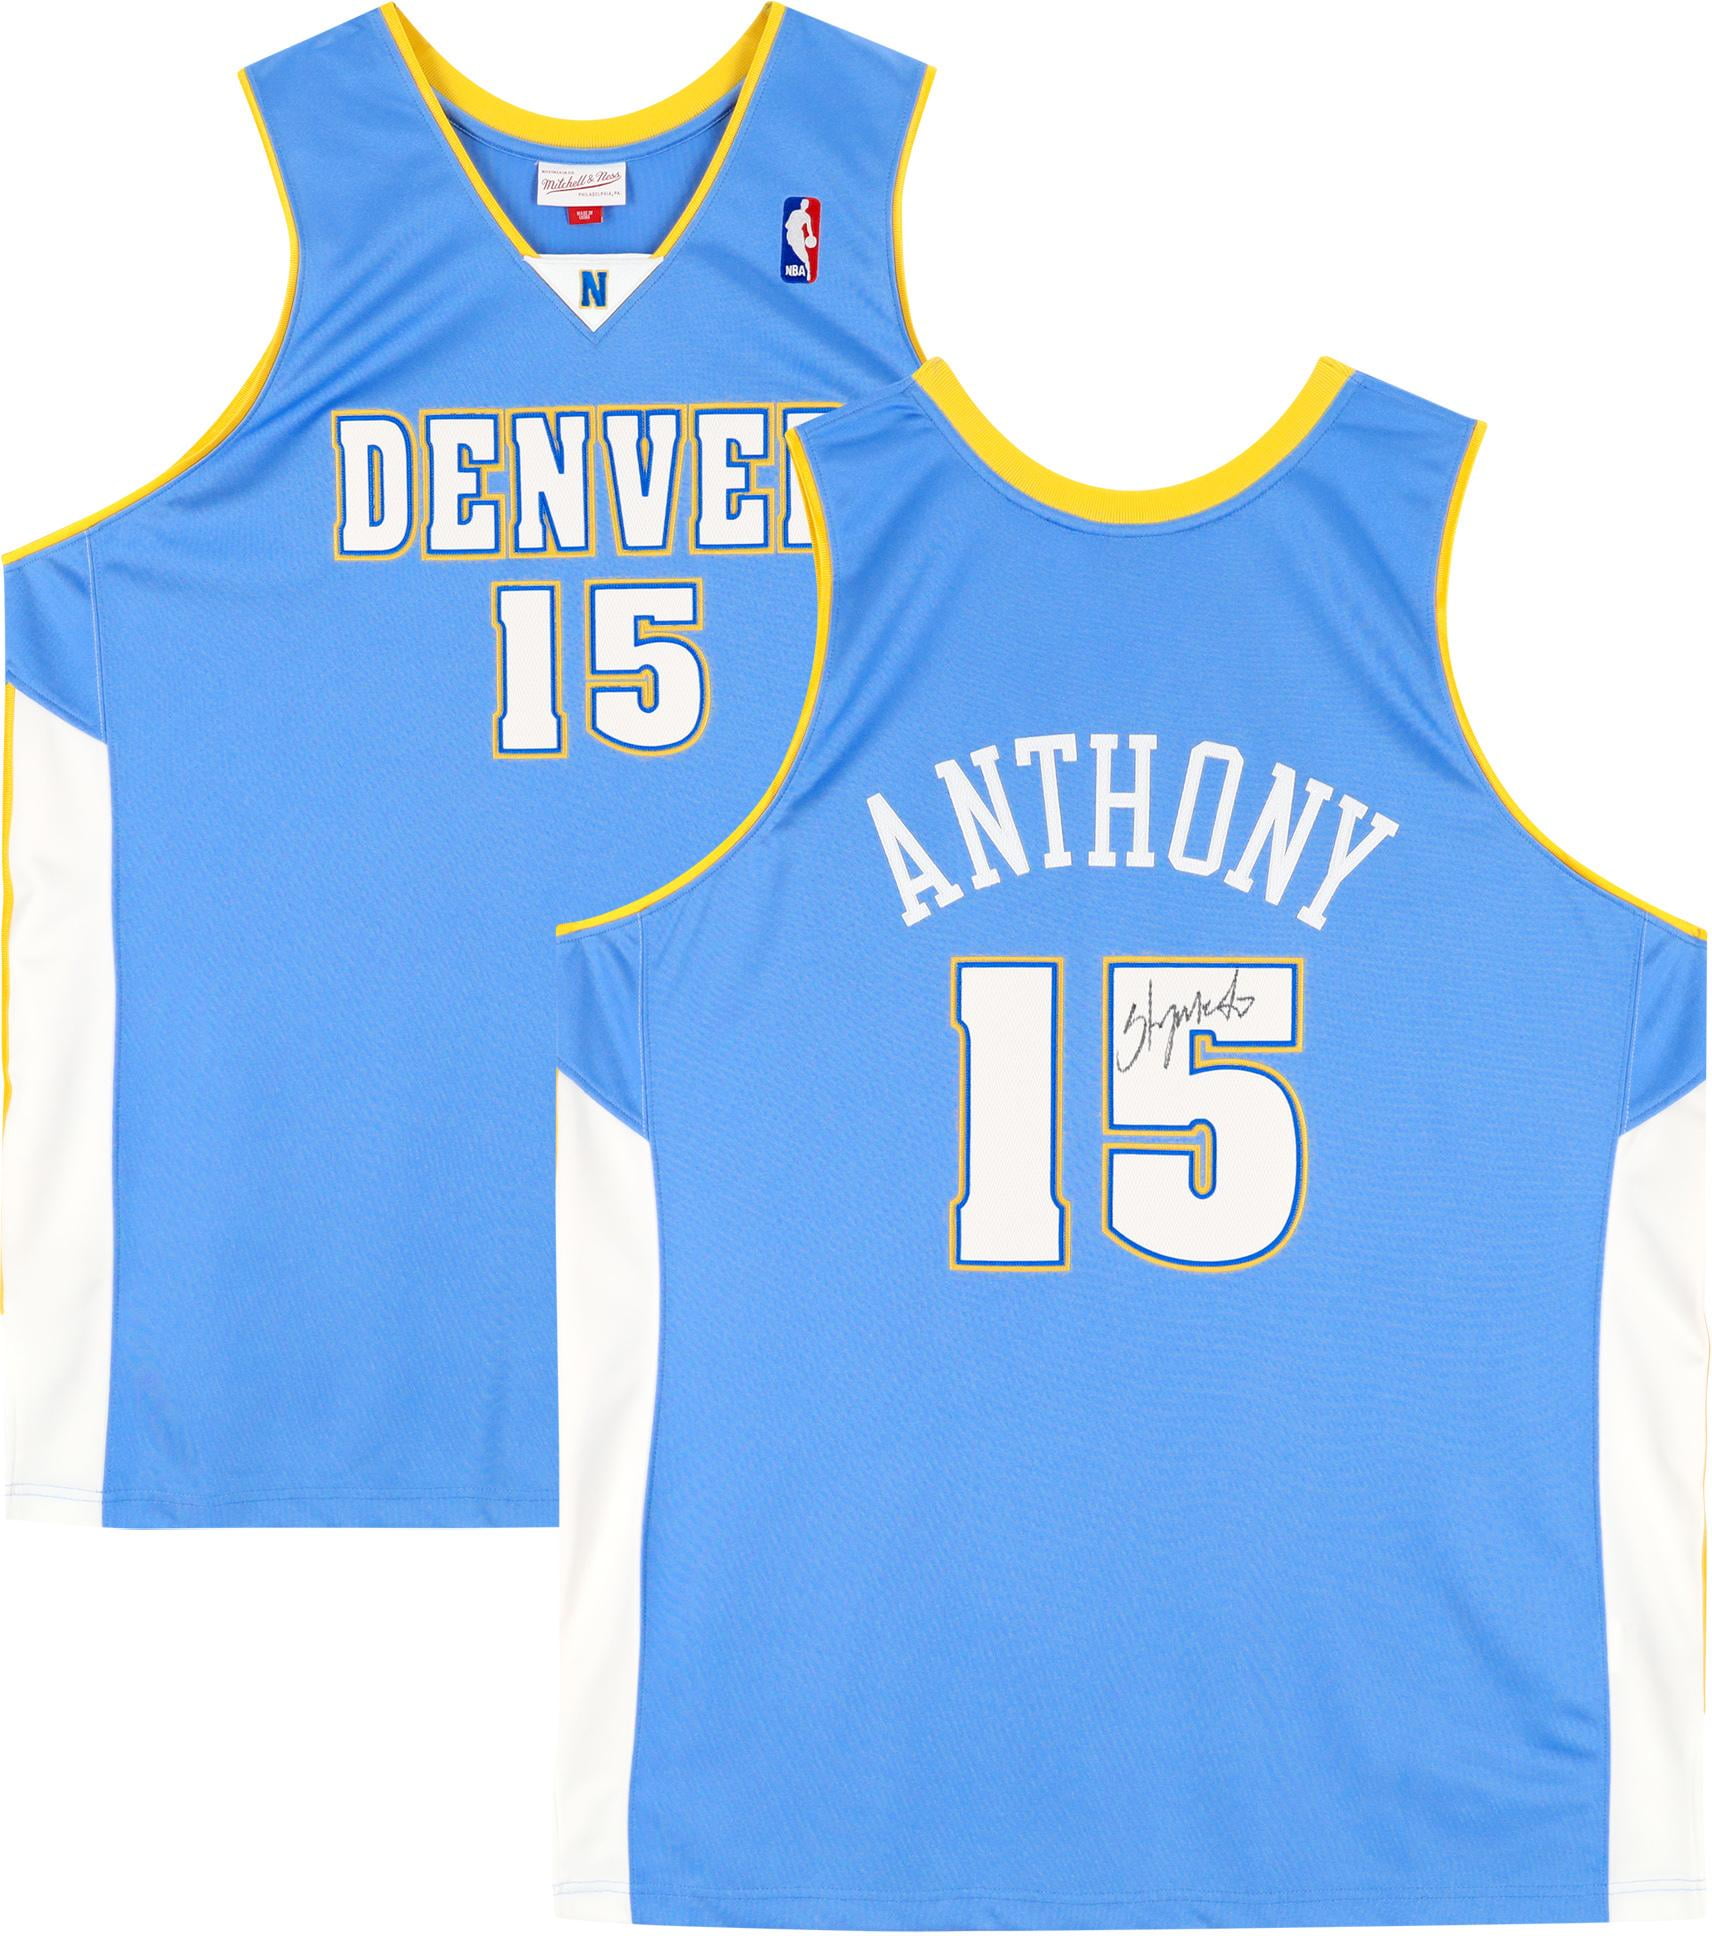 Carmelo Anthony Denver Nuggets Autographed Light Blue Mitchell & Ness  2003-2004 Authentic Jersey - Fanatics Authentic Certified 